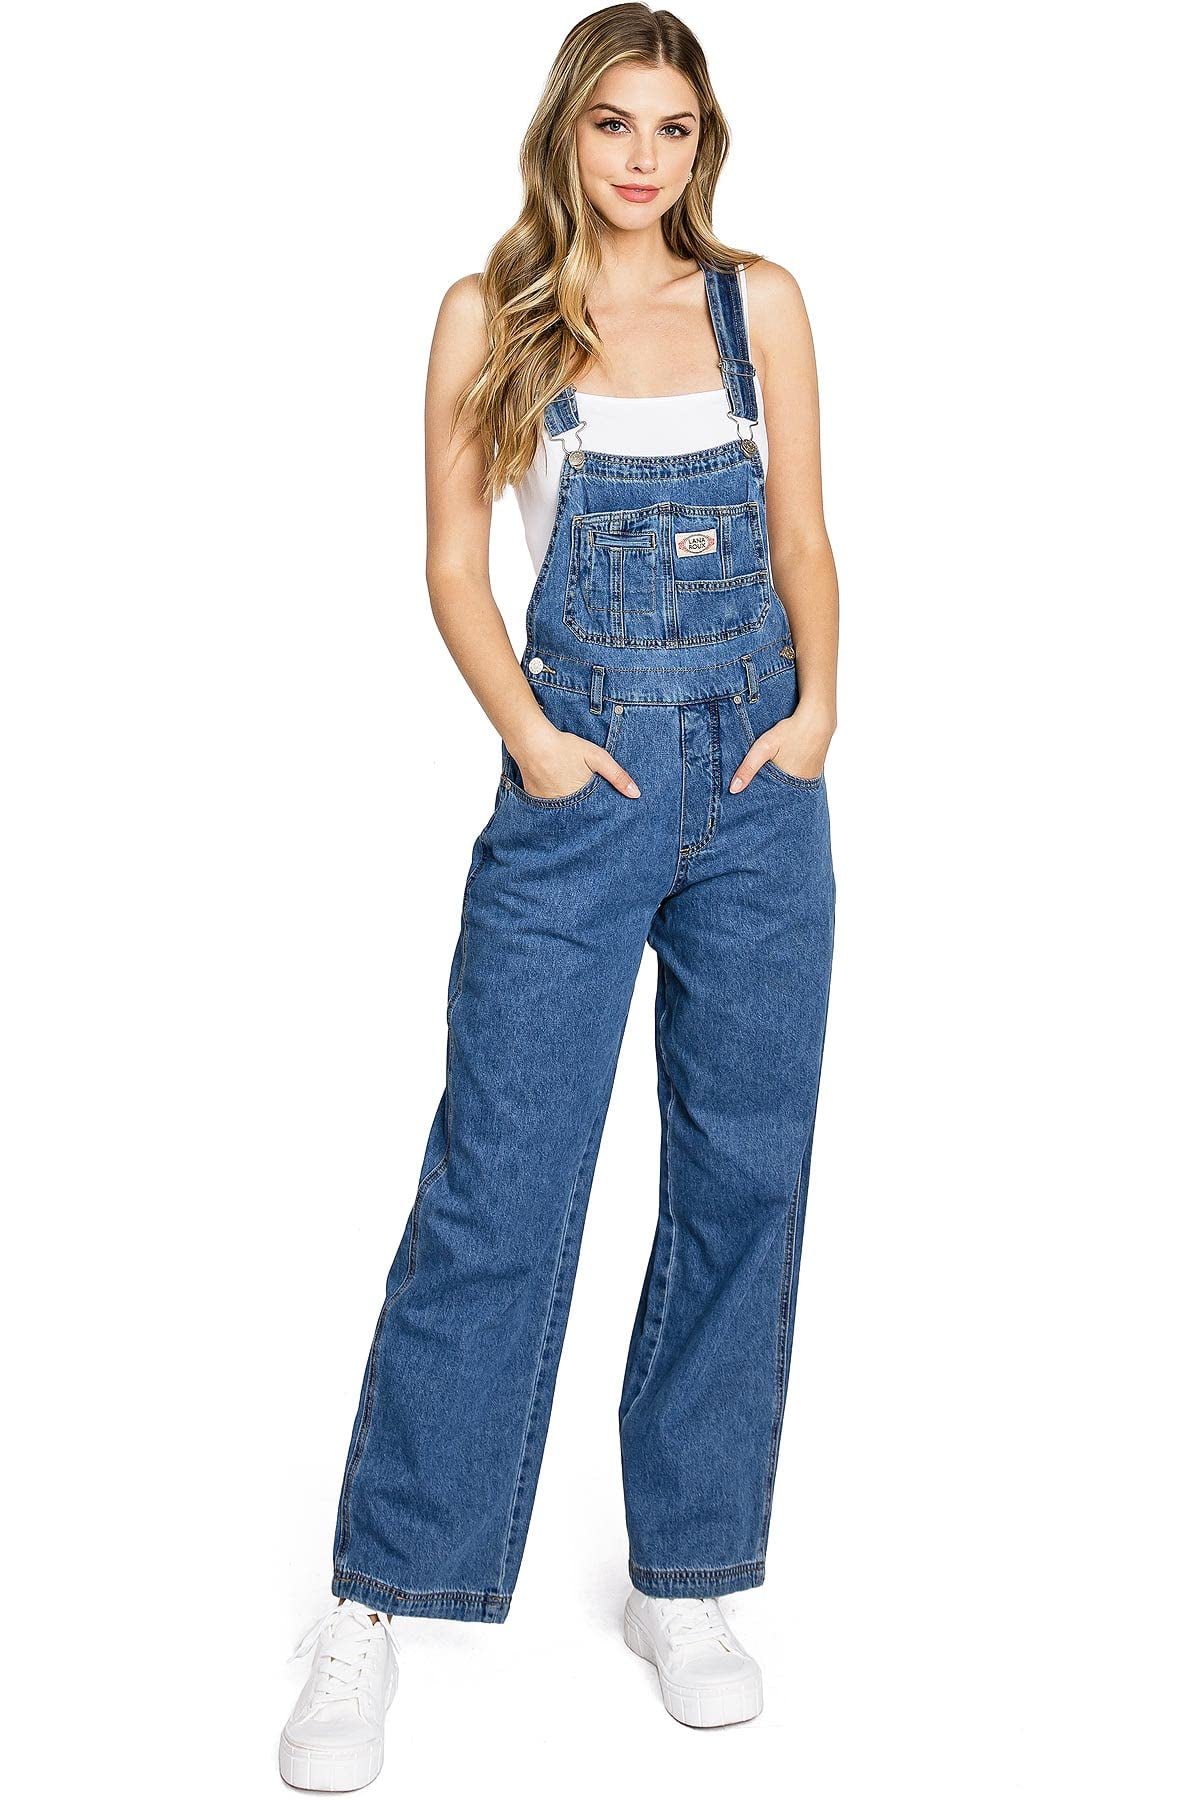 Women's Dungarees, Jumpsuits and Playsuits | PULL&BEAR